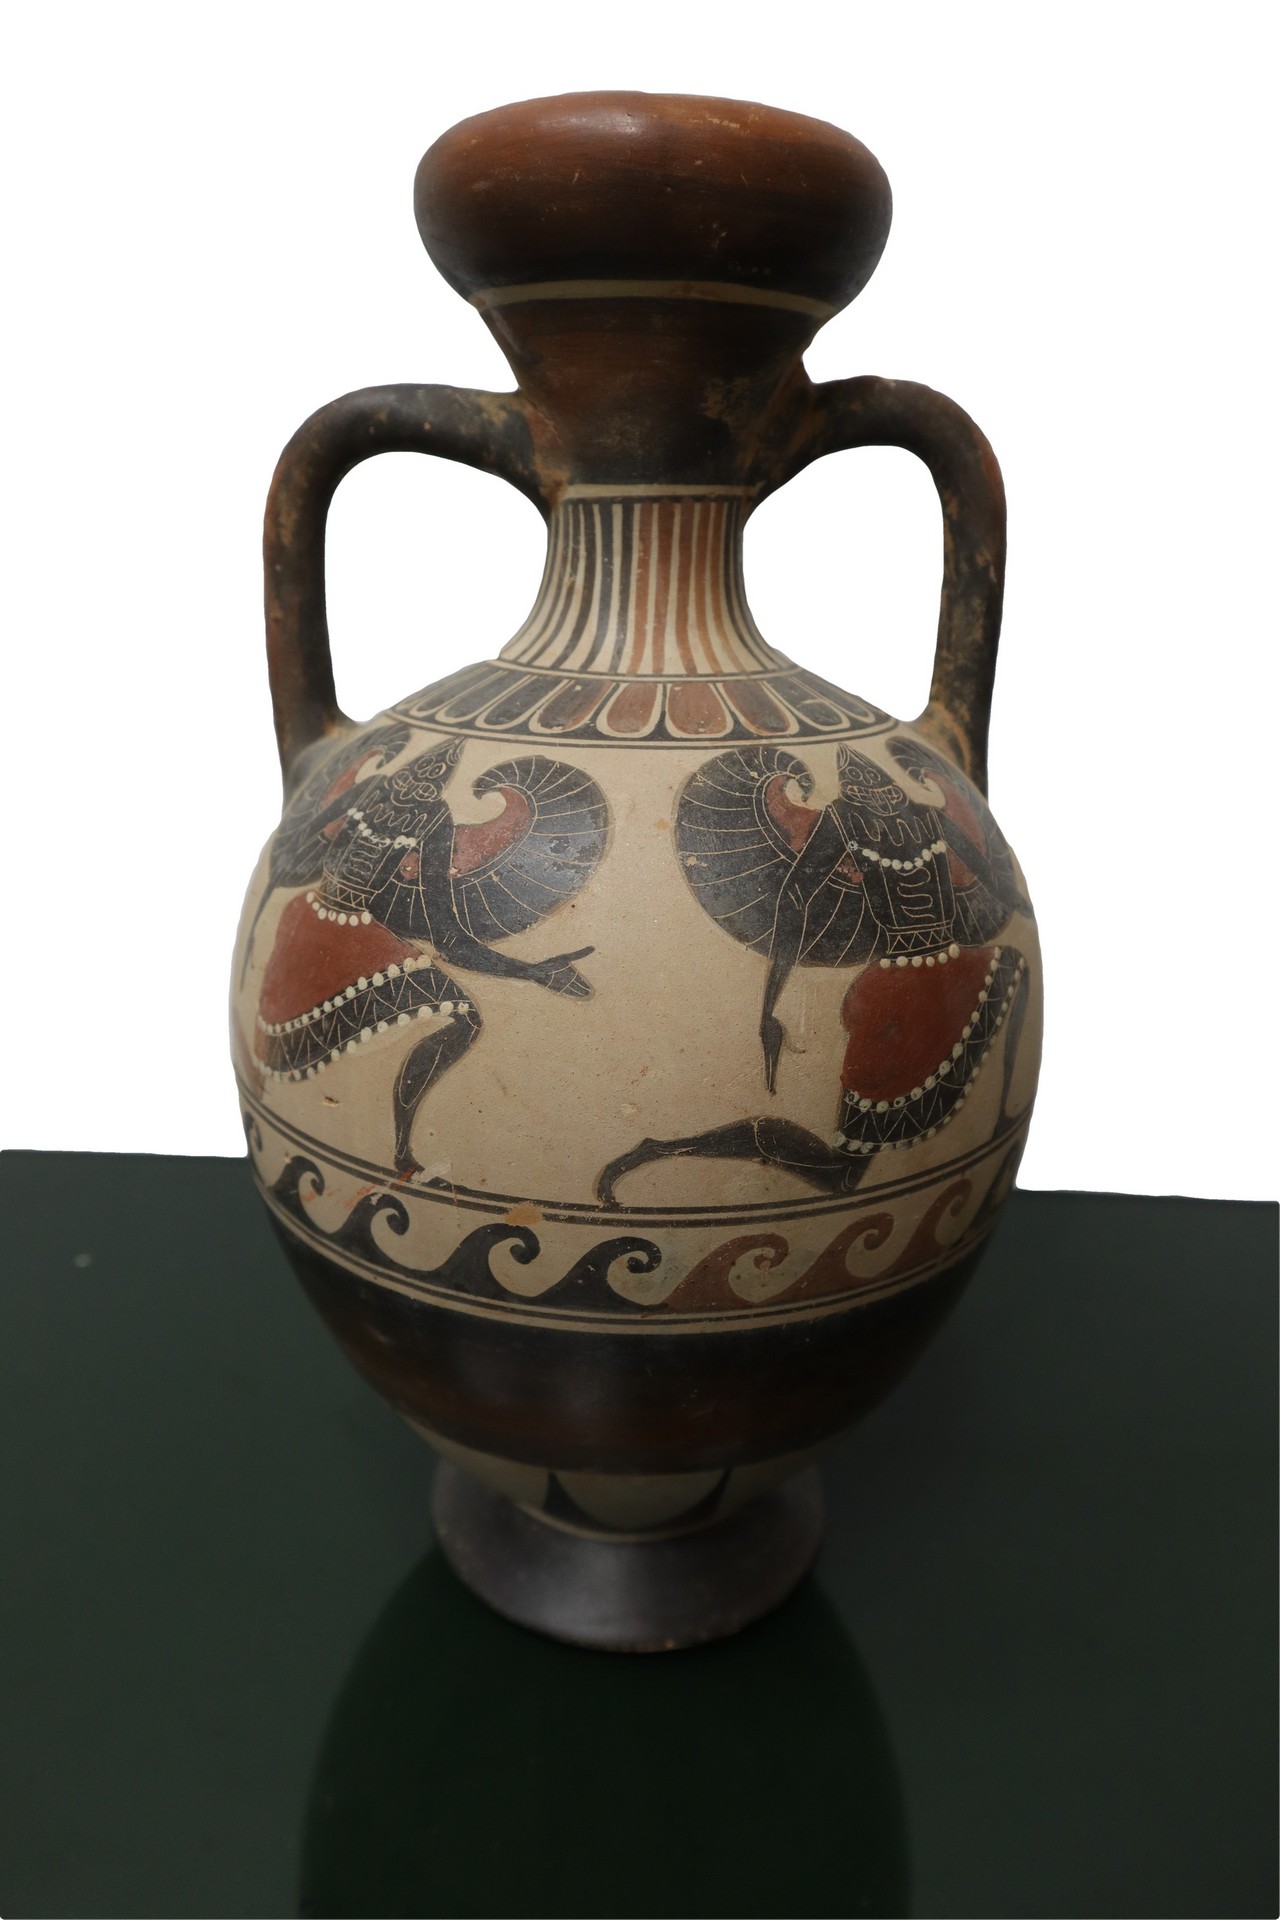 Reproduction of the Panathenaic amphora with two handles - Image 3 of 5